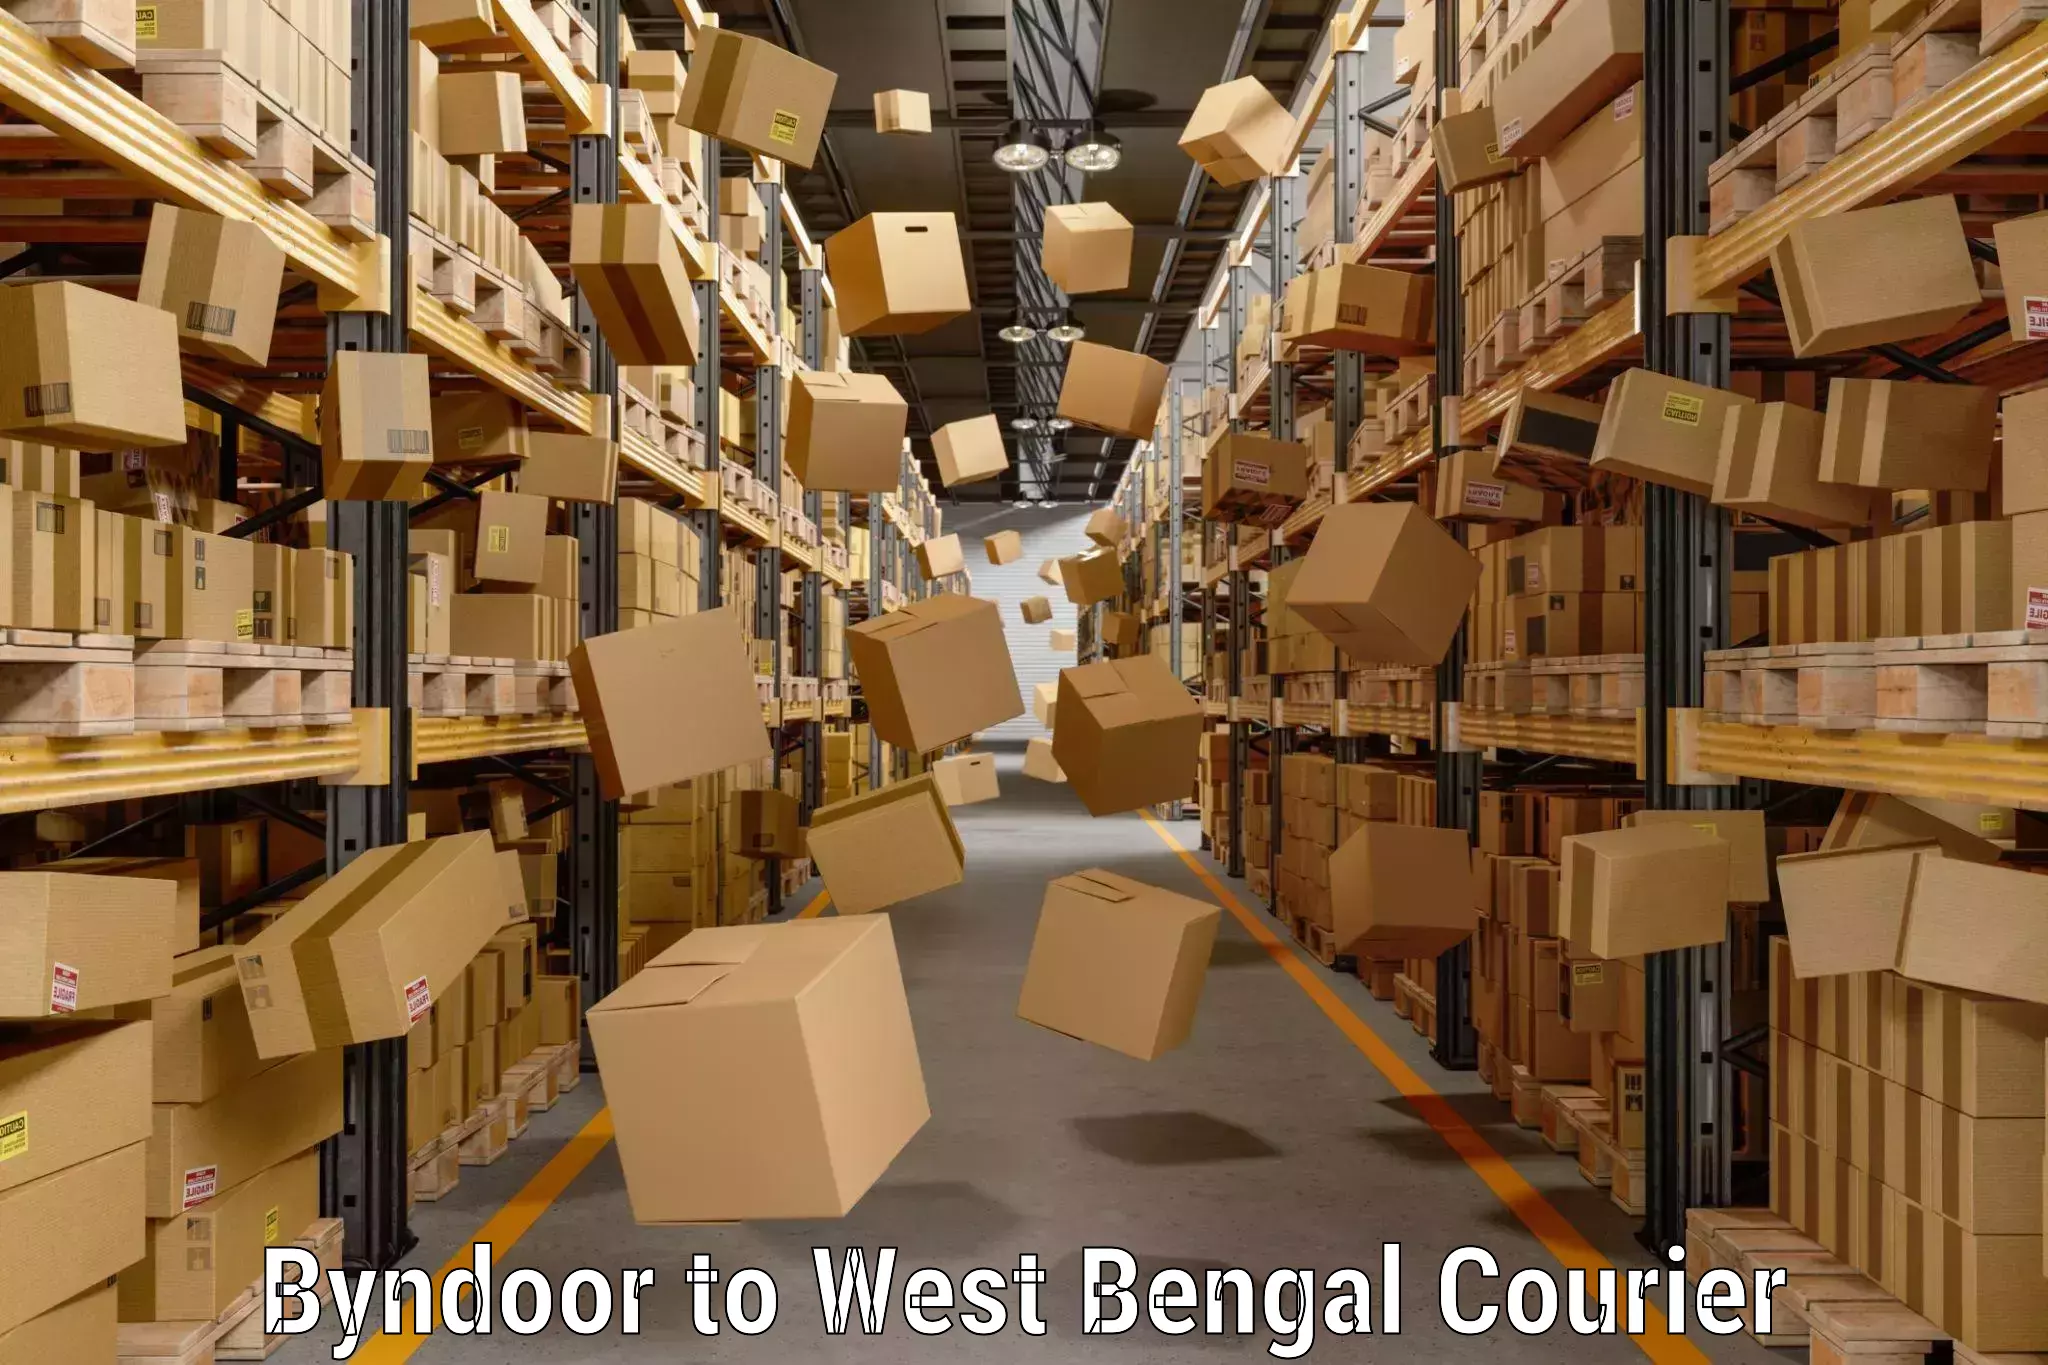 Luggage transport consultancy Byndoor to West Bengal